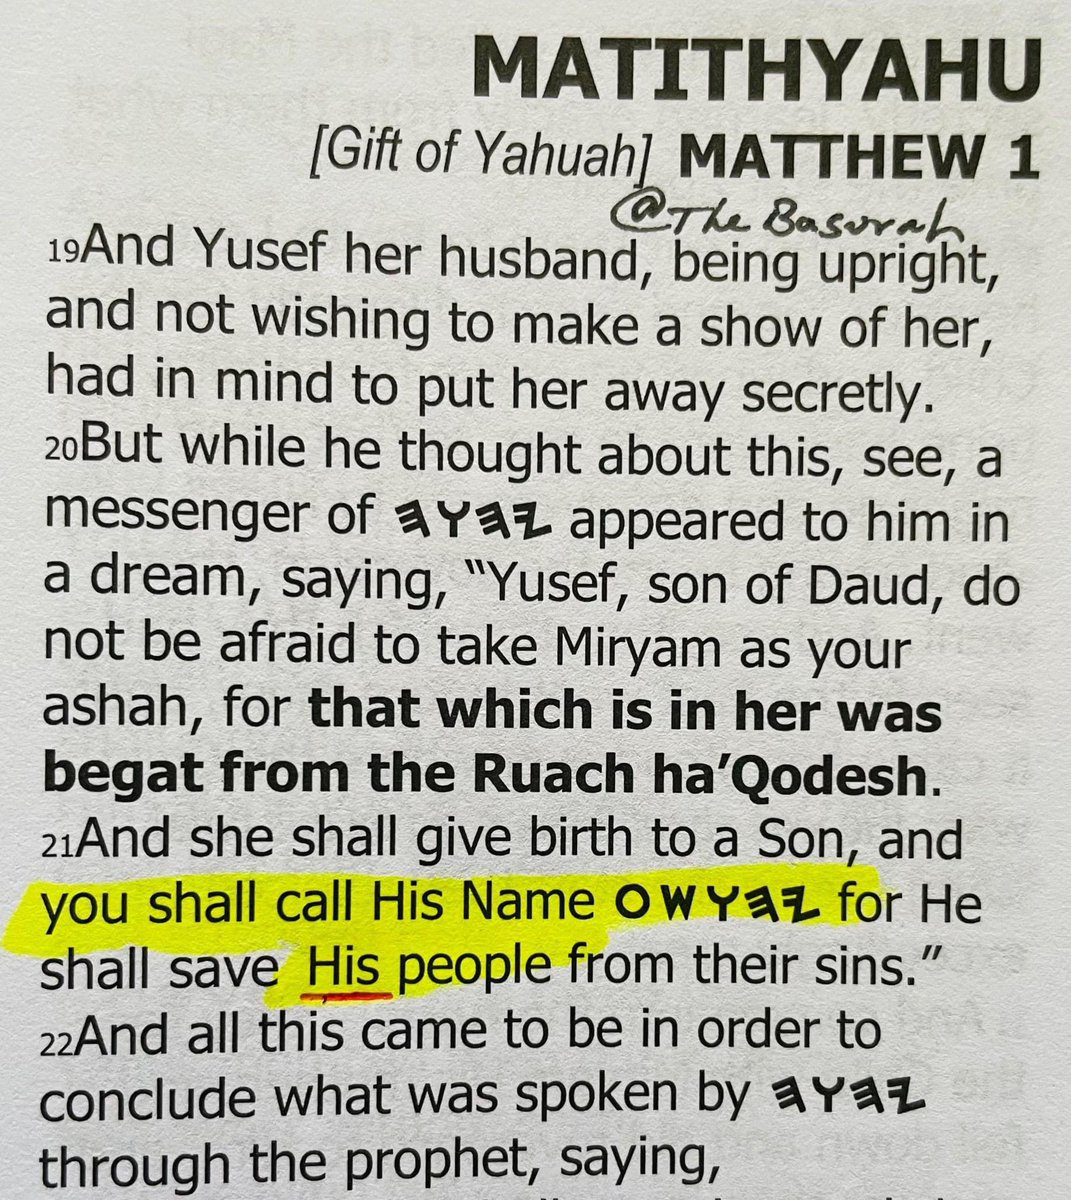 He shall save 👉🏽HIS people… NOT the world 🌎 👎🏾 Matthew 1:21